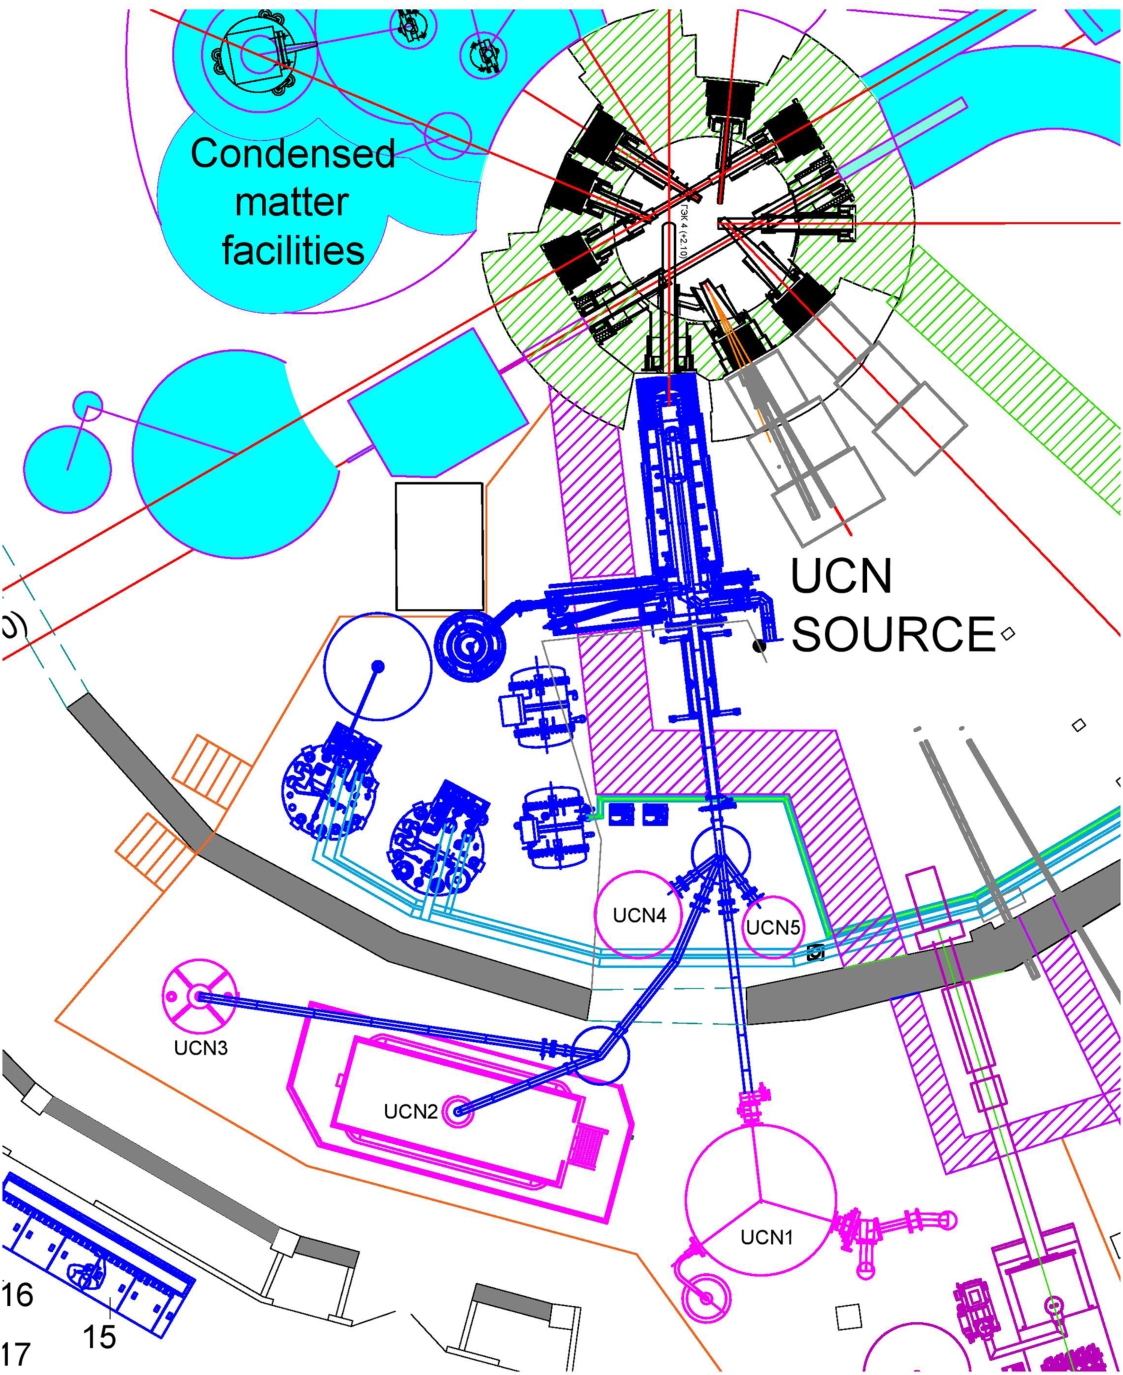 Floor plan showing the UCN source at GEK-4 at the PIK reactor with its UCN guide system (in navy blue) and beam ports to five locations for experiments (in magenta); UCN1 – nEDM experiment, UCN2 – gravitational trap, UCN3 – magnetic trap, UCN4 – free, UCN5 – free.